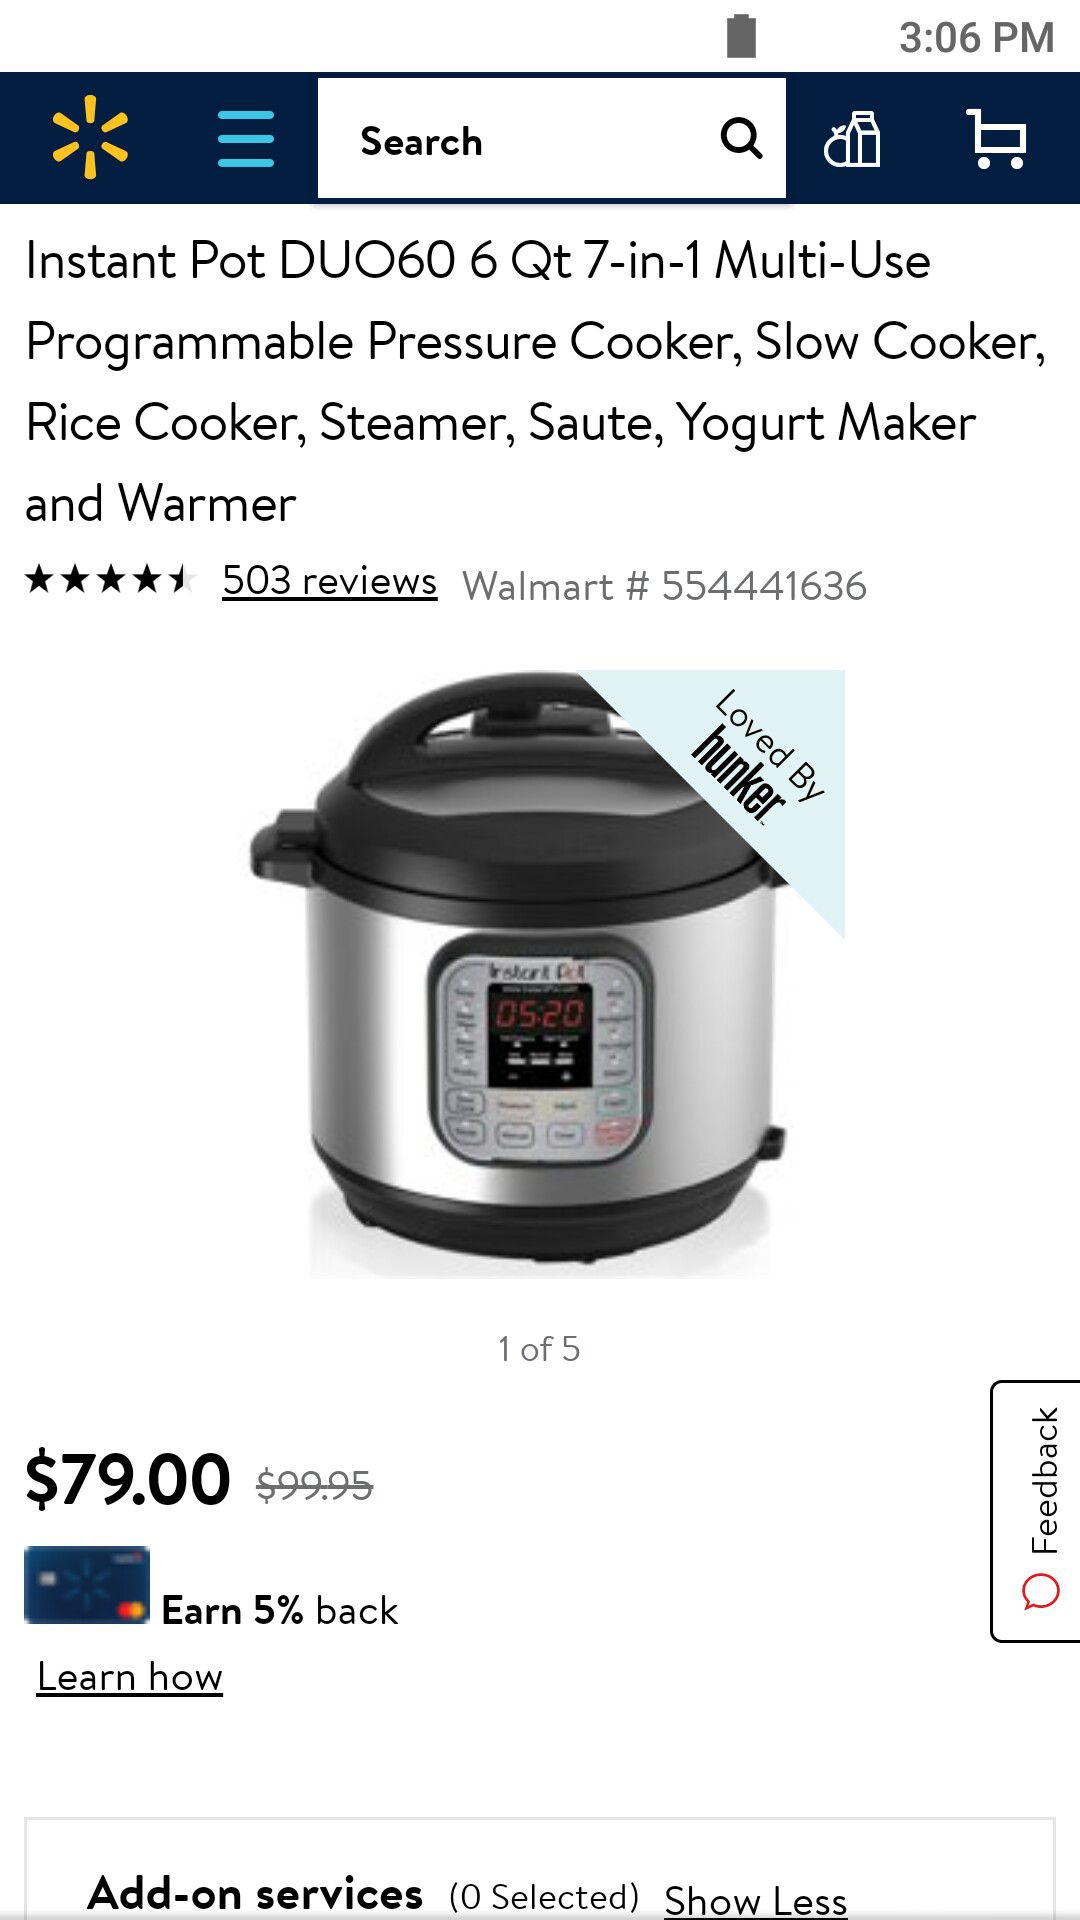 Instant Pot DUO60 6 Qt 7-in-1 Multi-Use Programmable Pressure Cooker, Slow Cooker, Rice Cooker, Steamer, Saute, Yogurt Maker and Warmer Retail $79.99